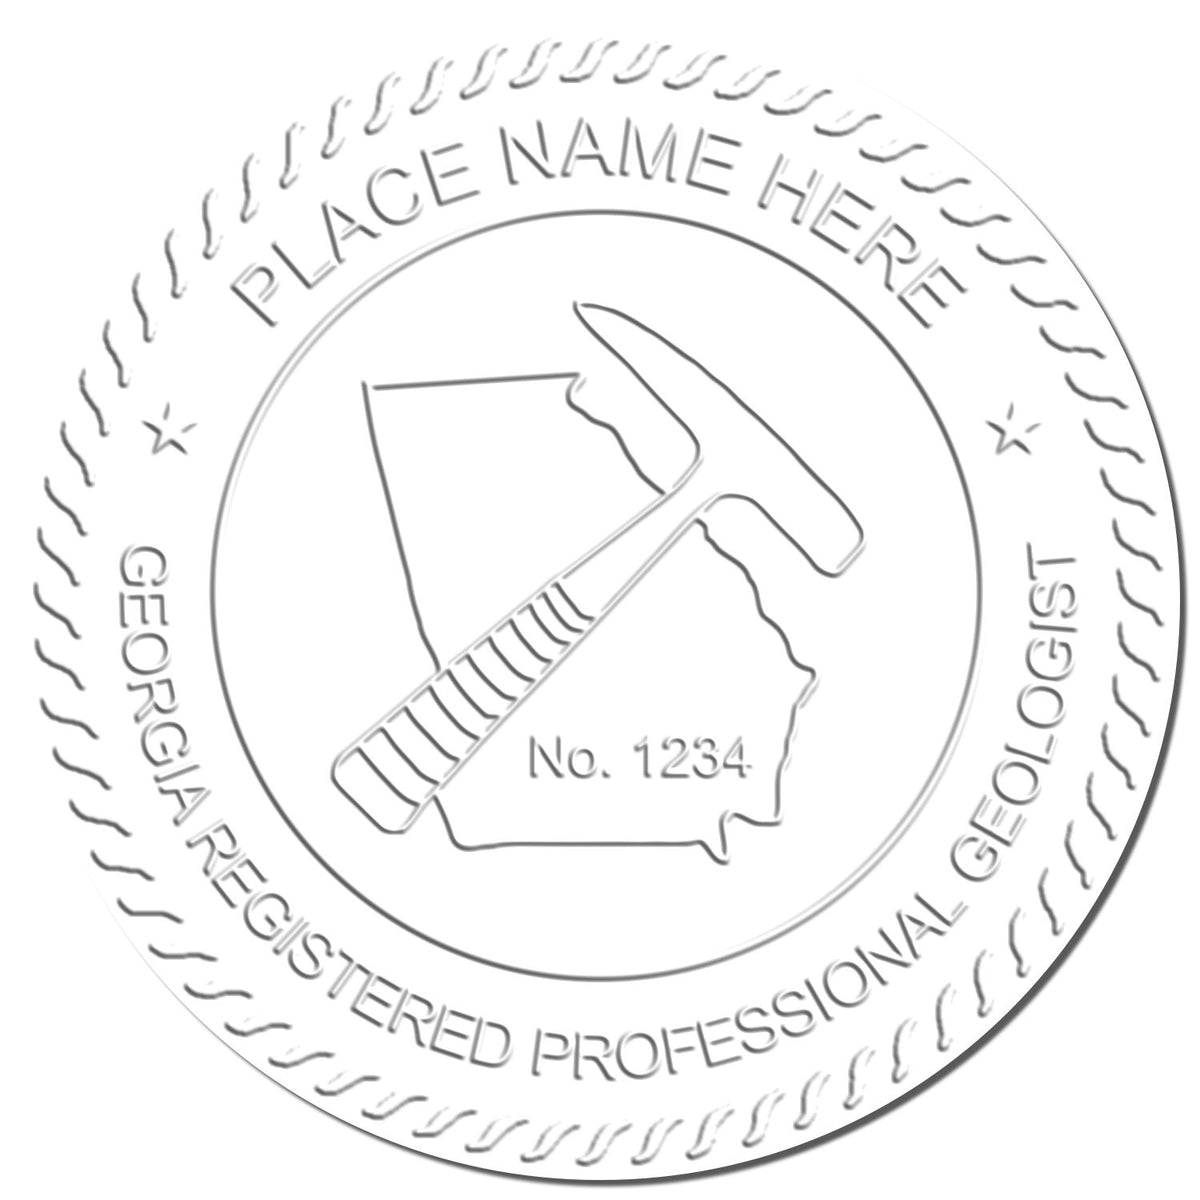 The Georgia Geologist Desk Seal stamp impression comes to life with a crisp, detailed image stamped on paper - showcasing true professional quality.